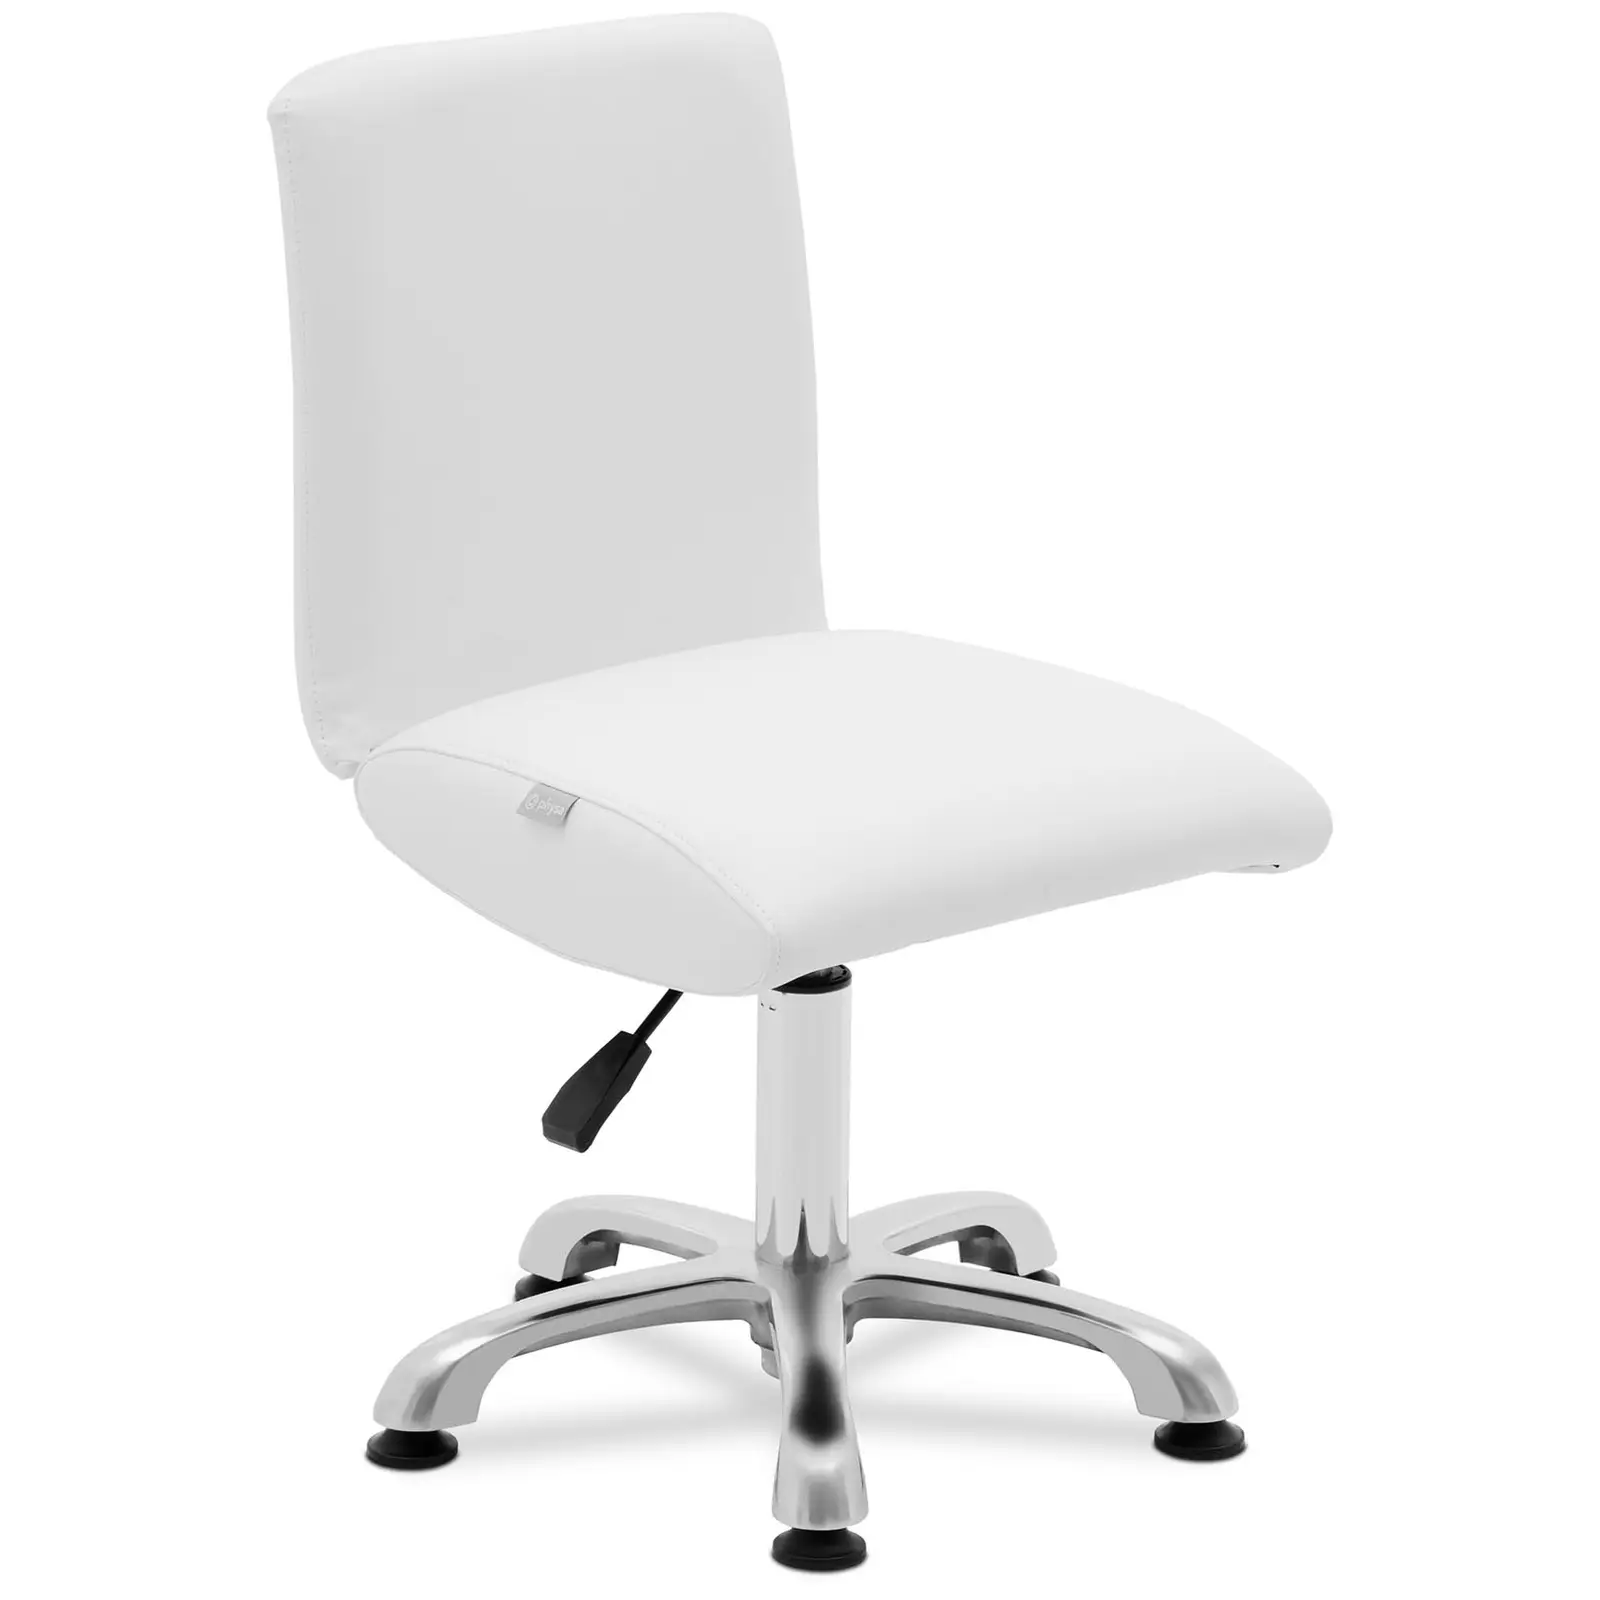 Work chair with backrest - 38 - 52 cm - 150 kg - white